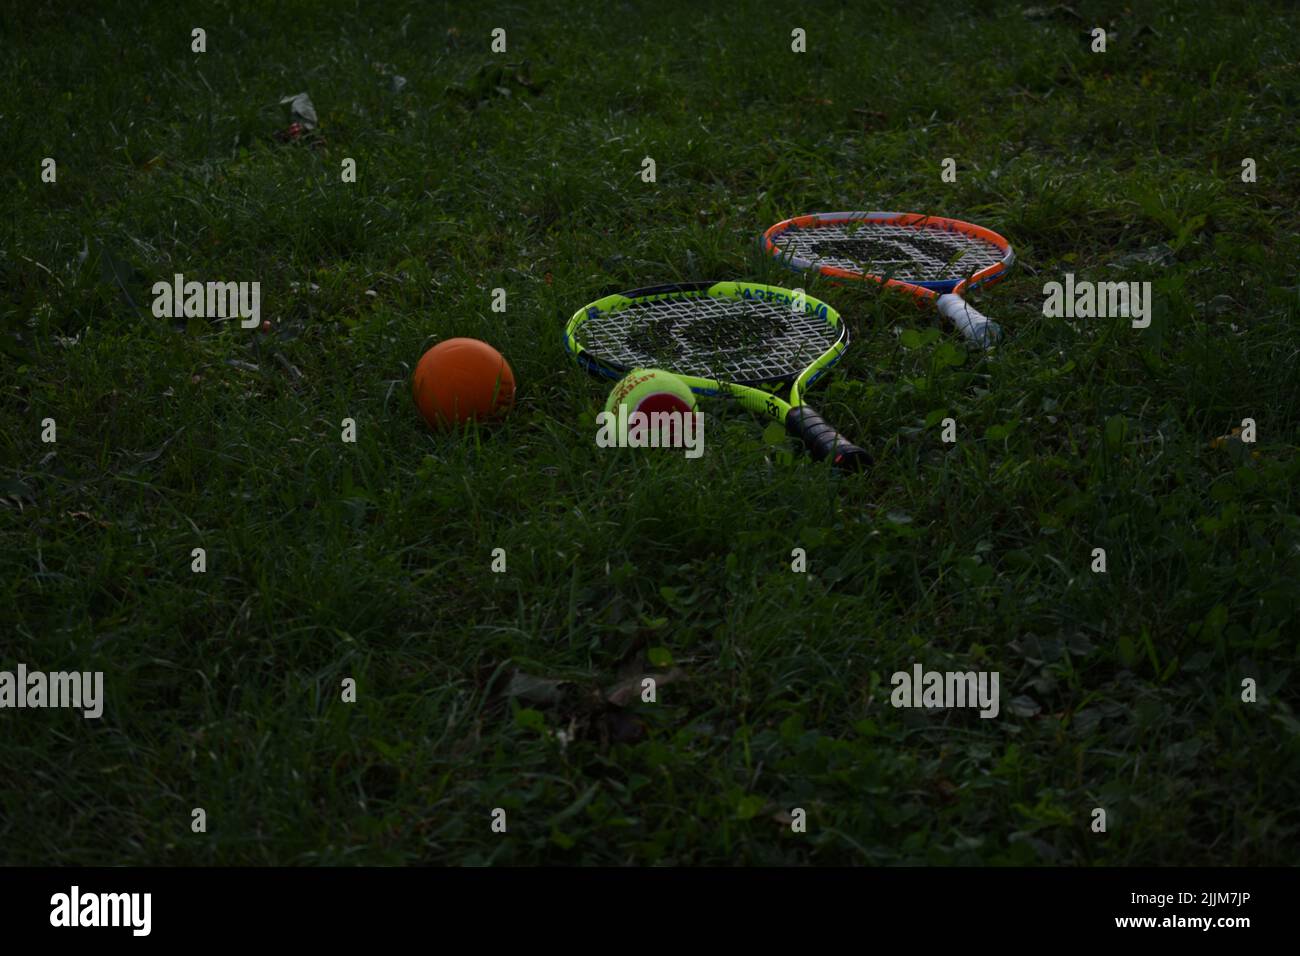 A view of tennis balls and rackets on the grass Stock Photo